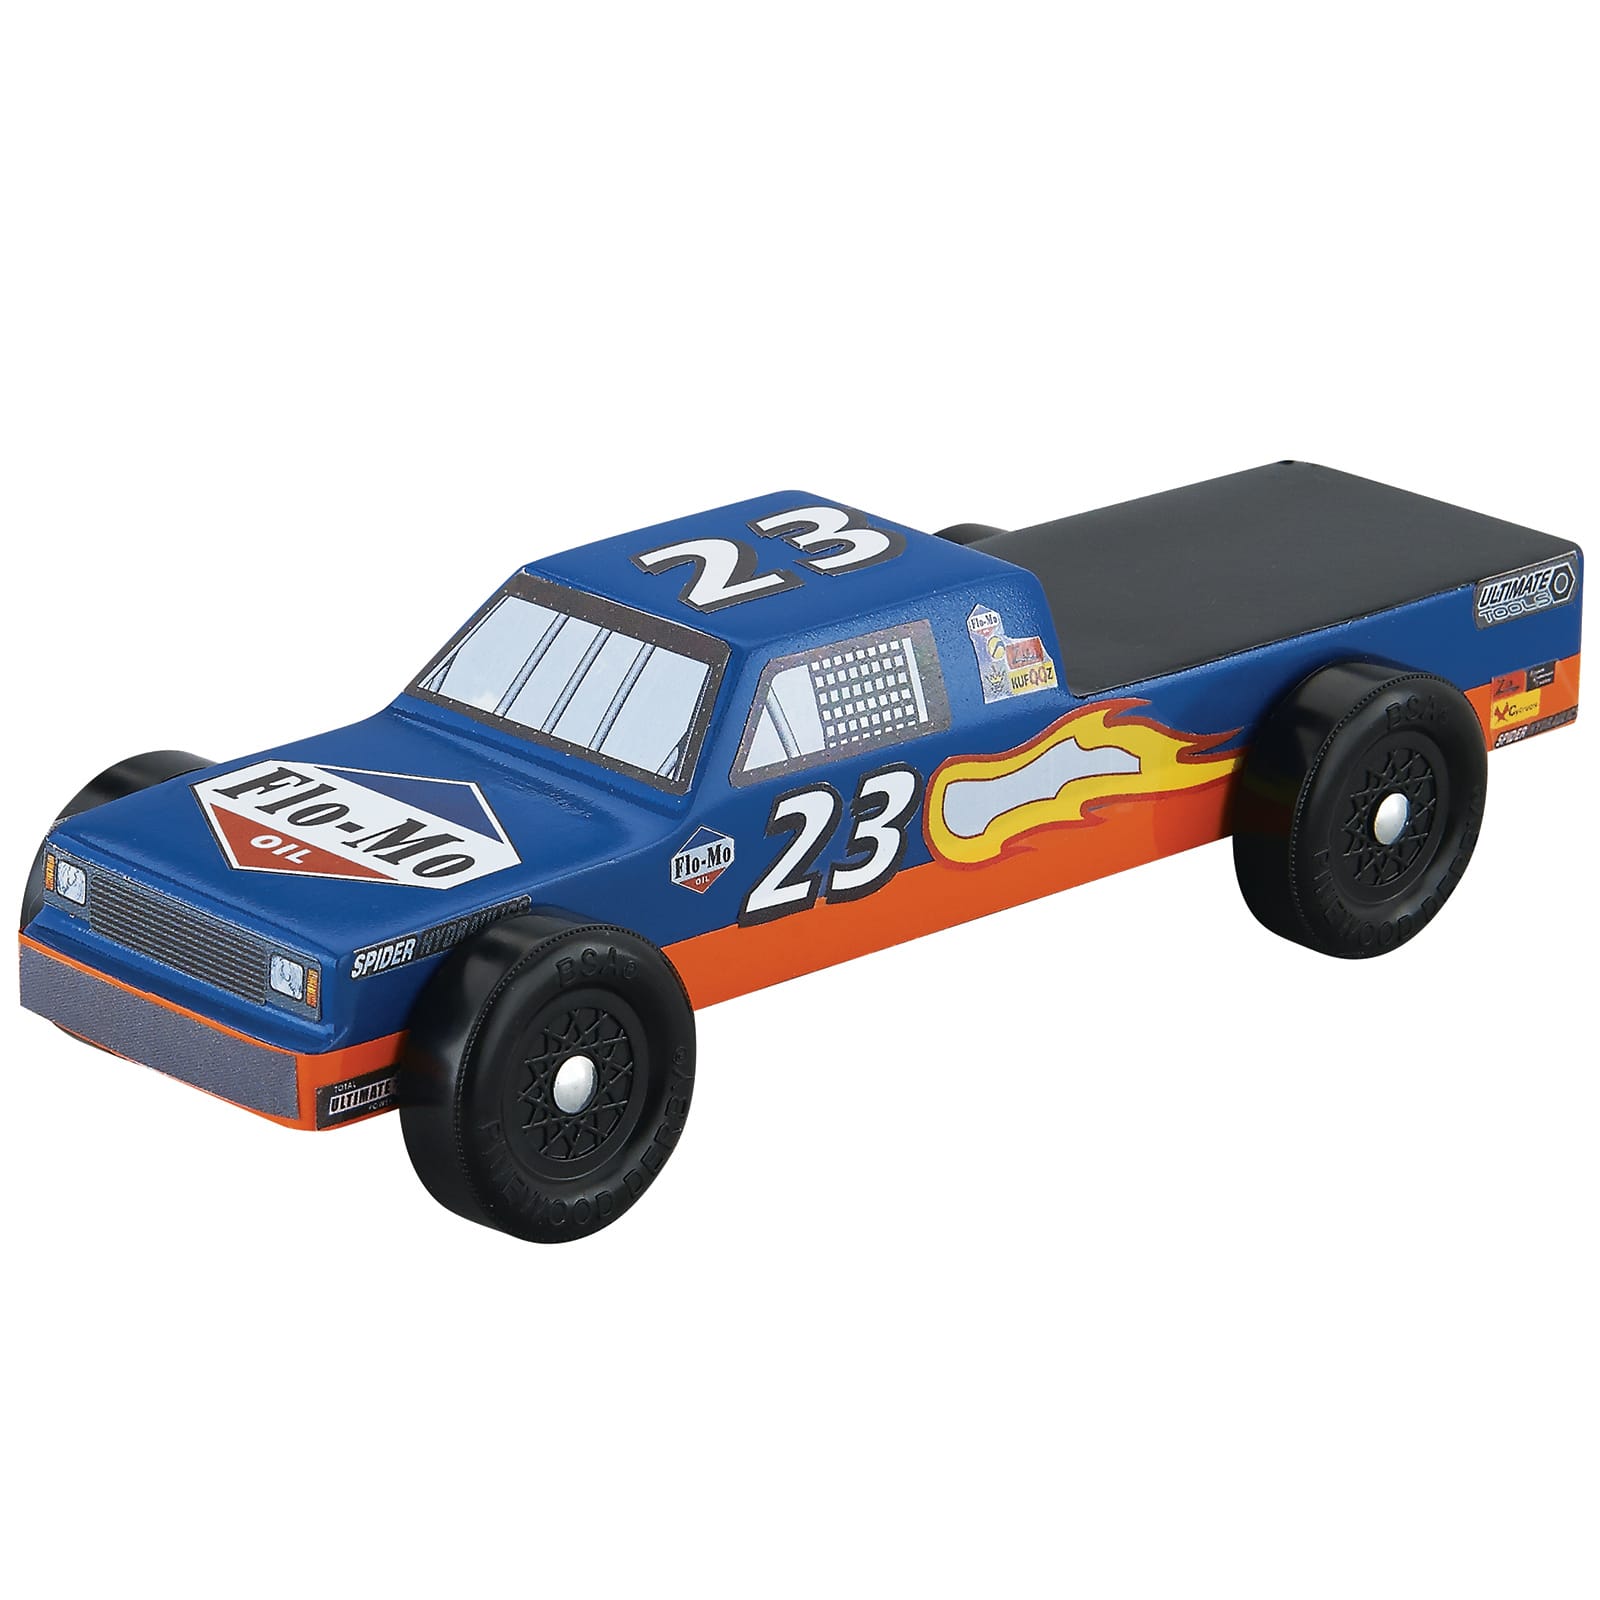 shop-for-the-revell-pinewood-derby-stock-race-truck-starter-series